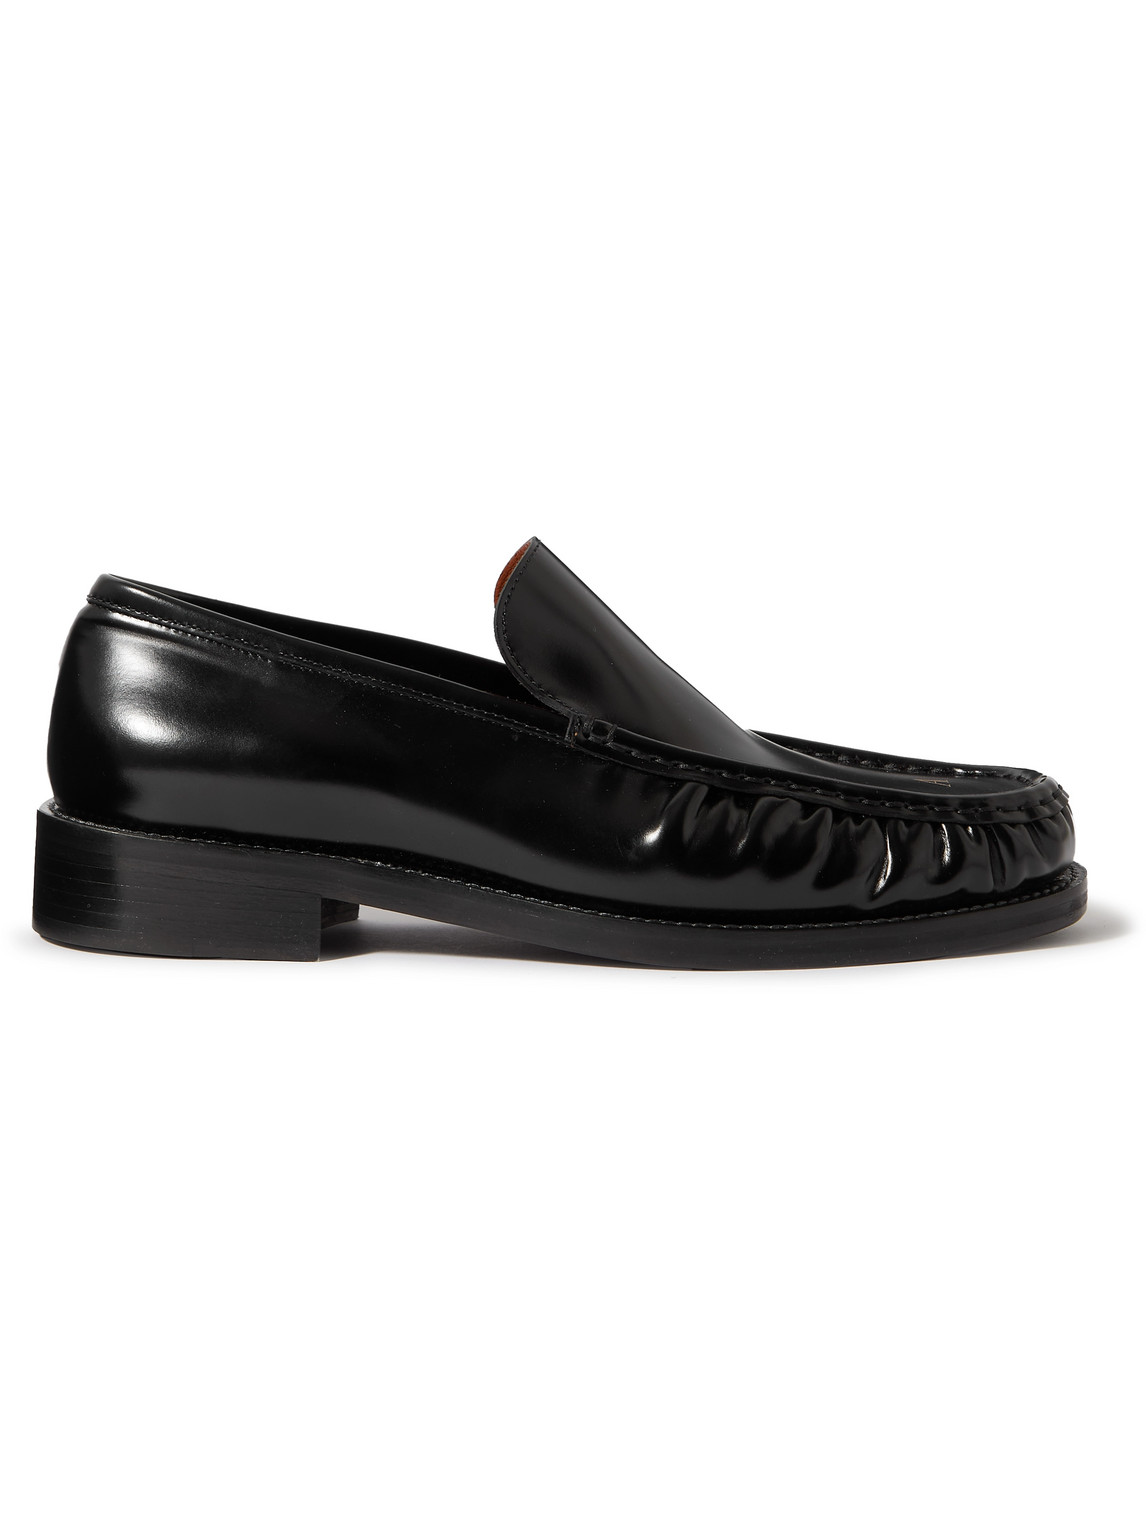 ACNE STUDIOS LEATHER LOAFERS